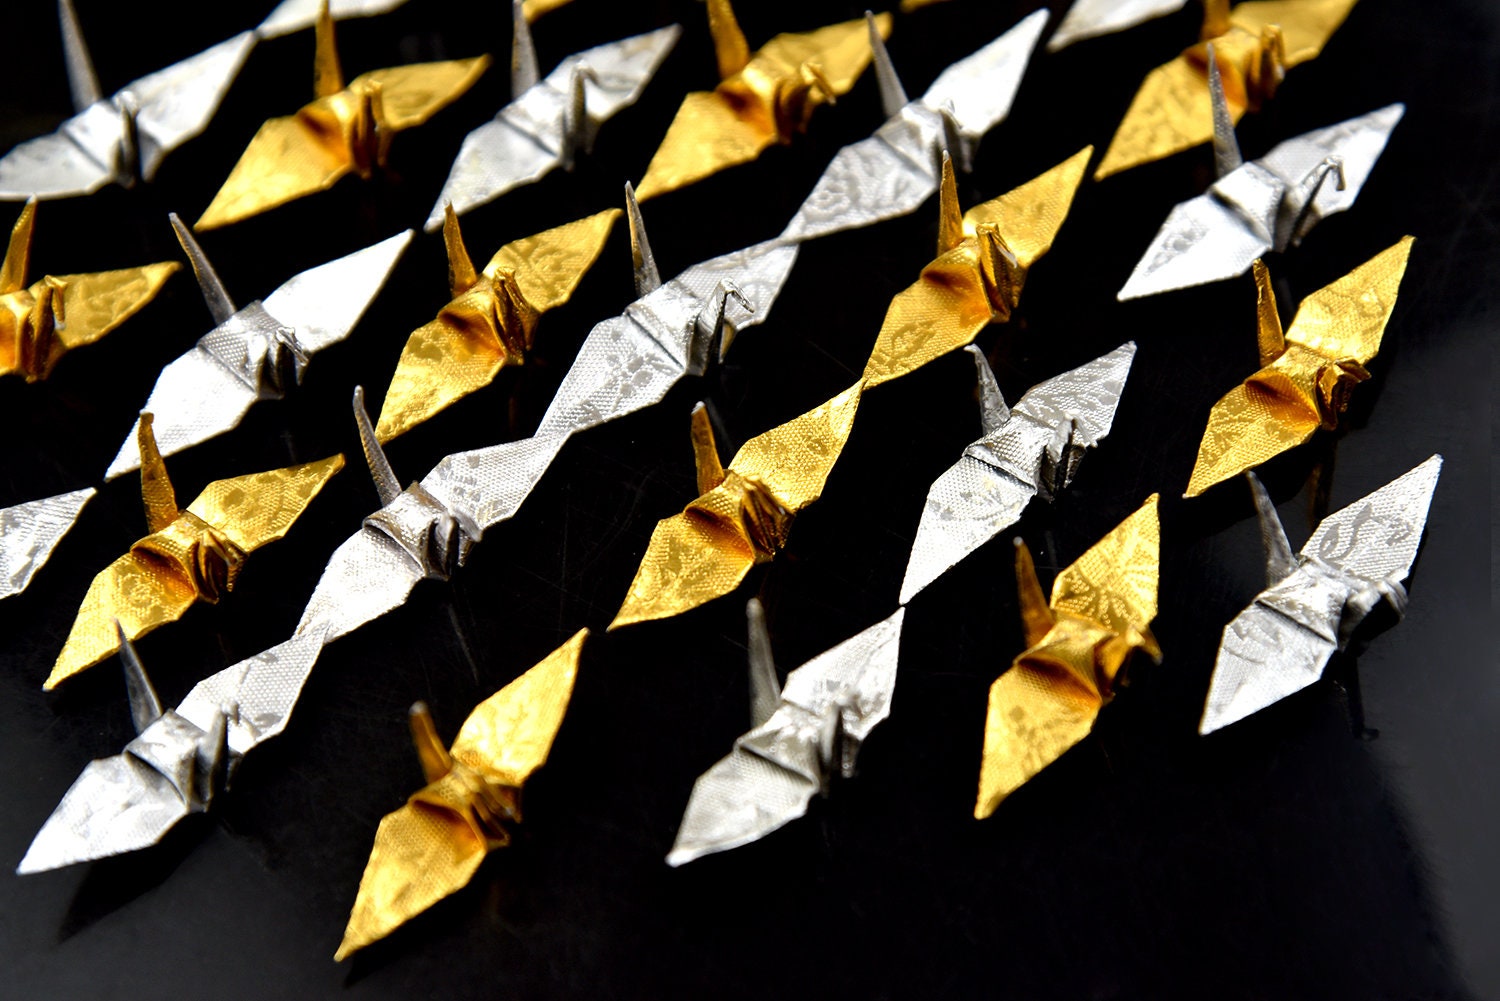 1000 Origami Paper Crane Gold Silver with Rose Pattern Small 1.5x1.5 inch